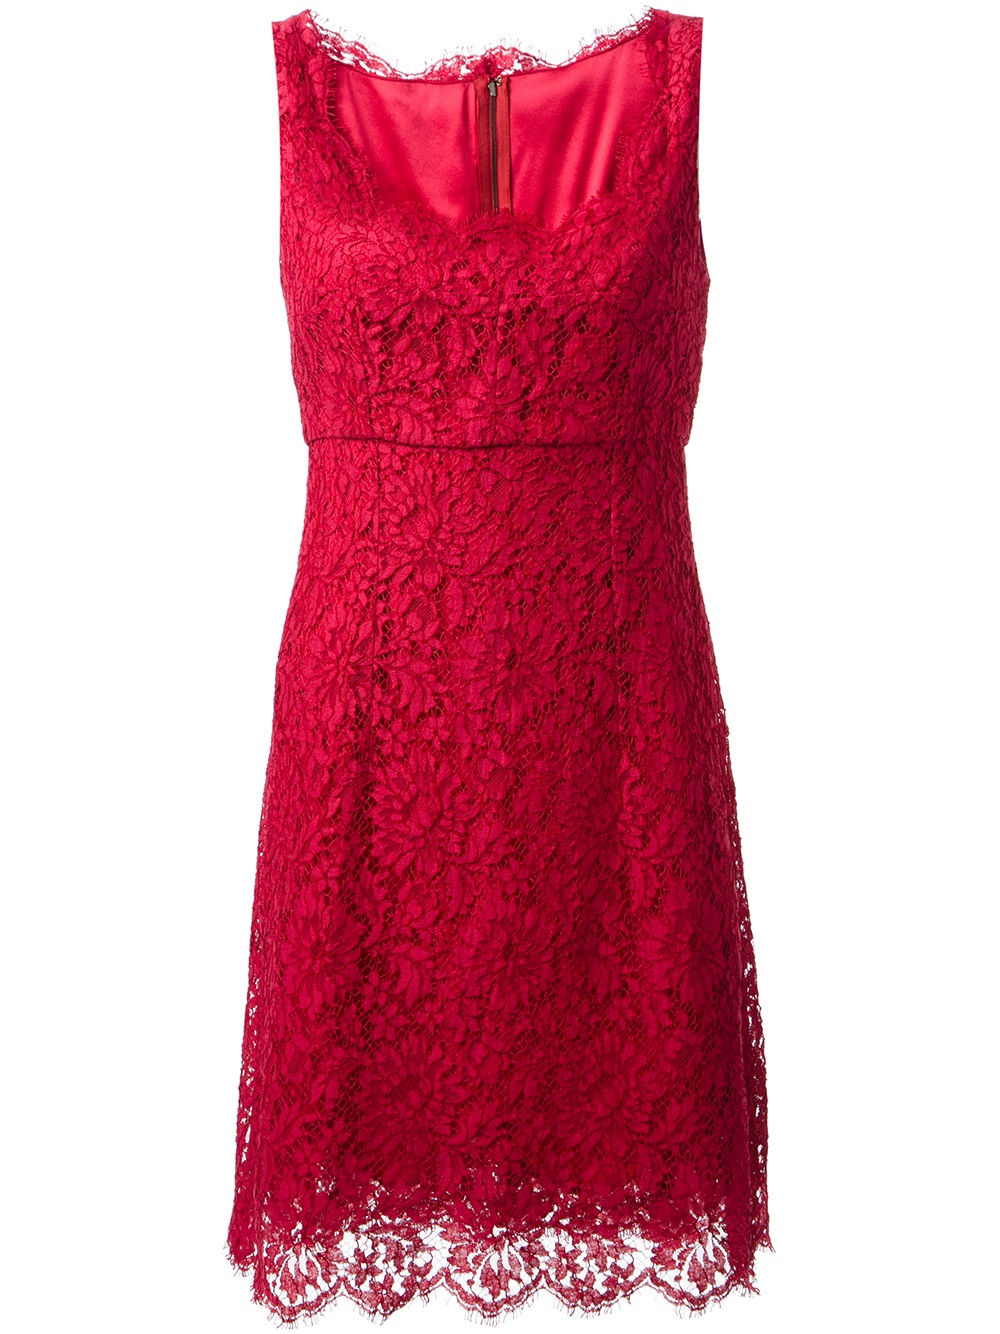 Dolce & Gabbana Floral Lace Sleeveless Dress in Red | Lyst